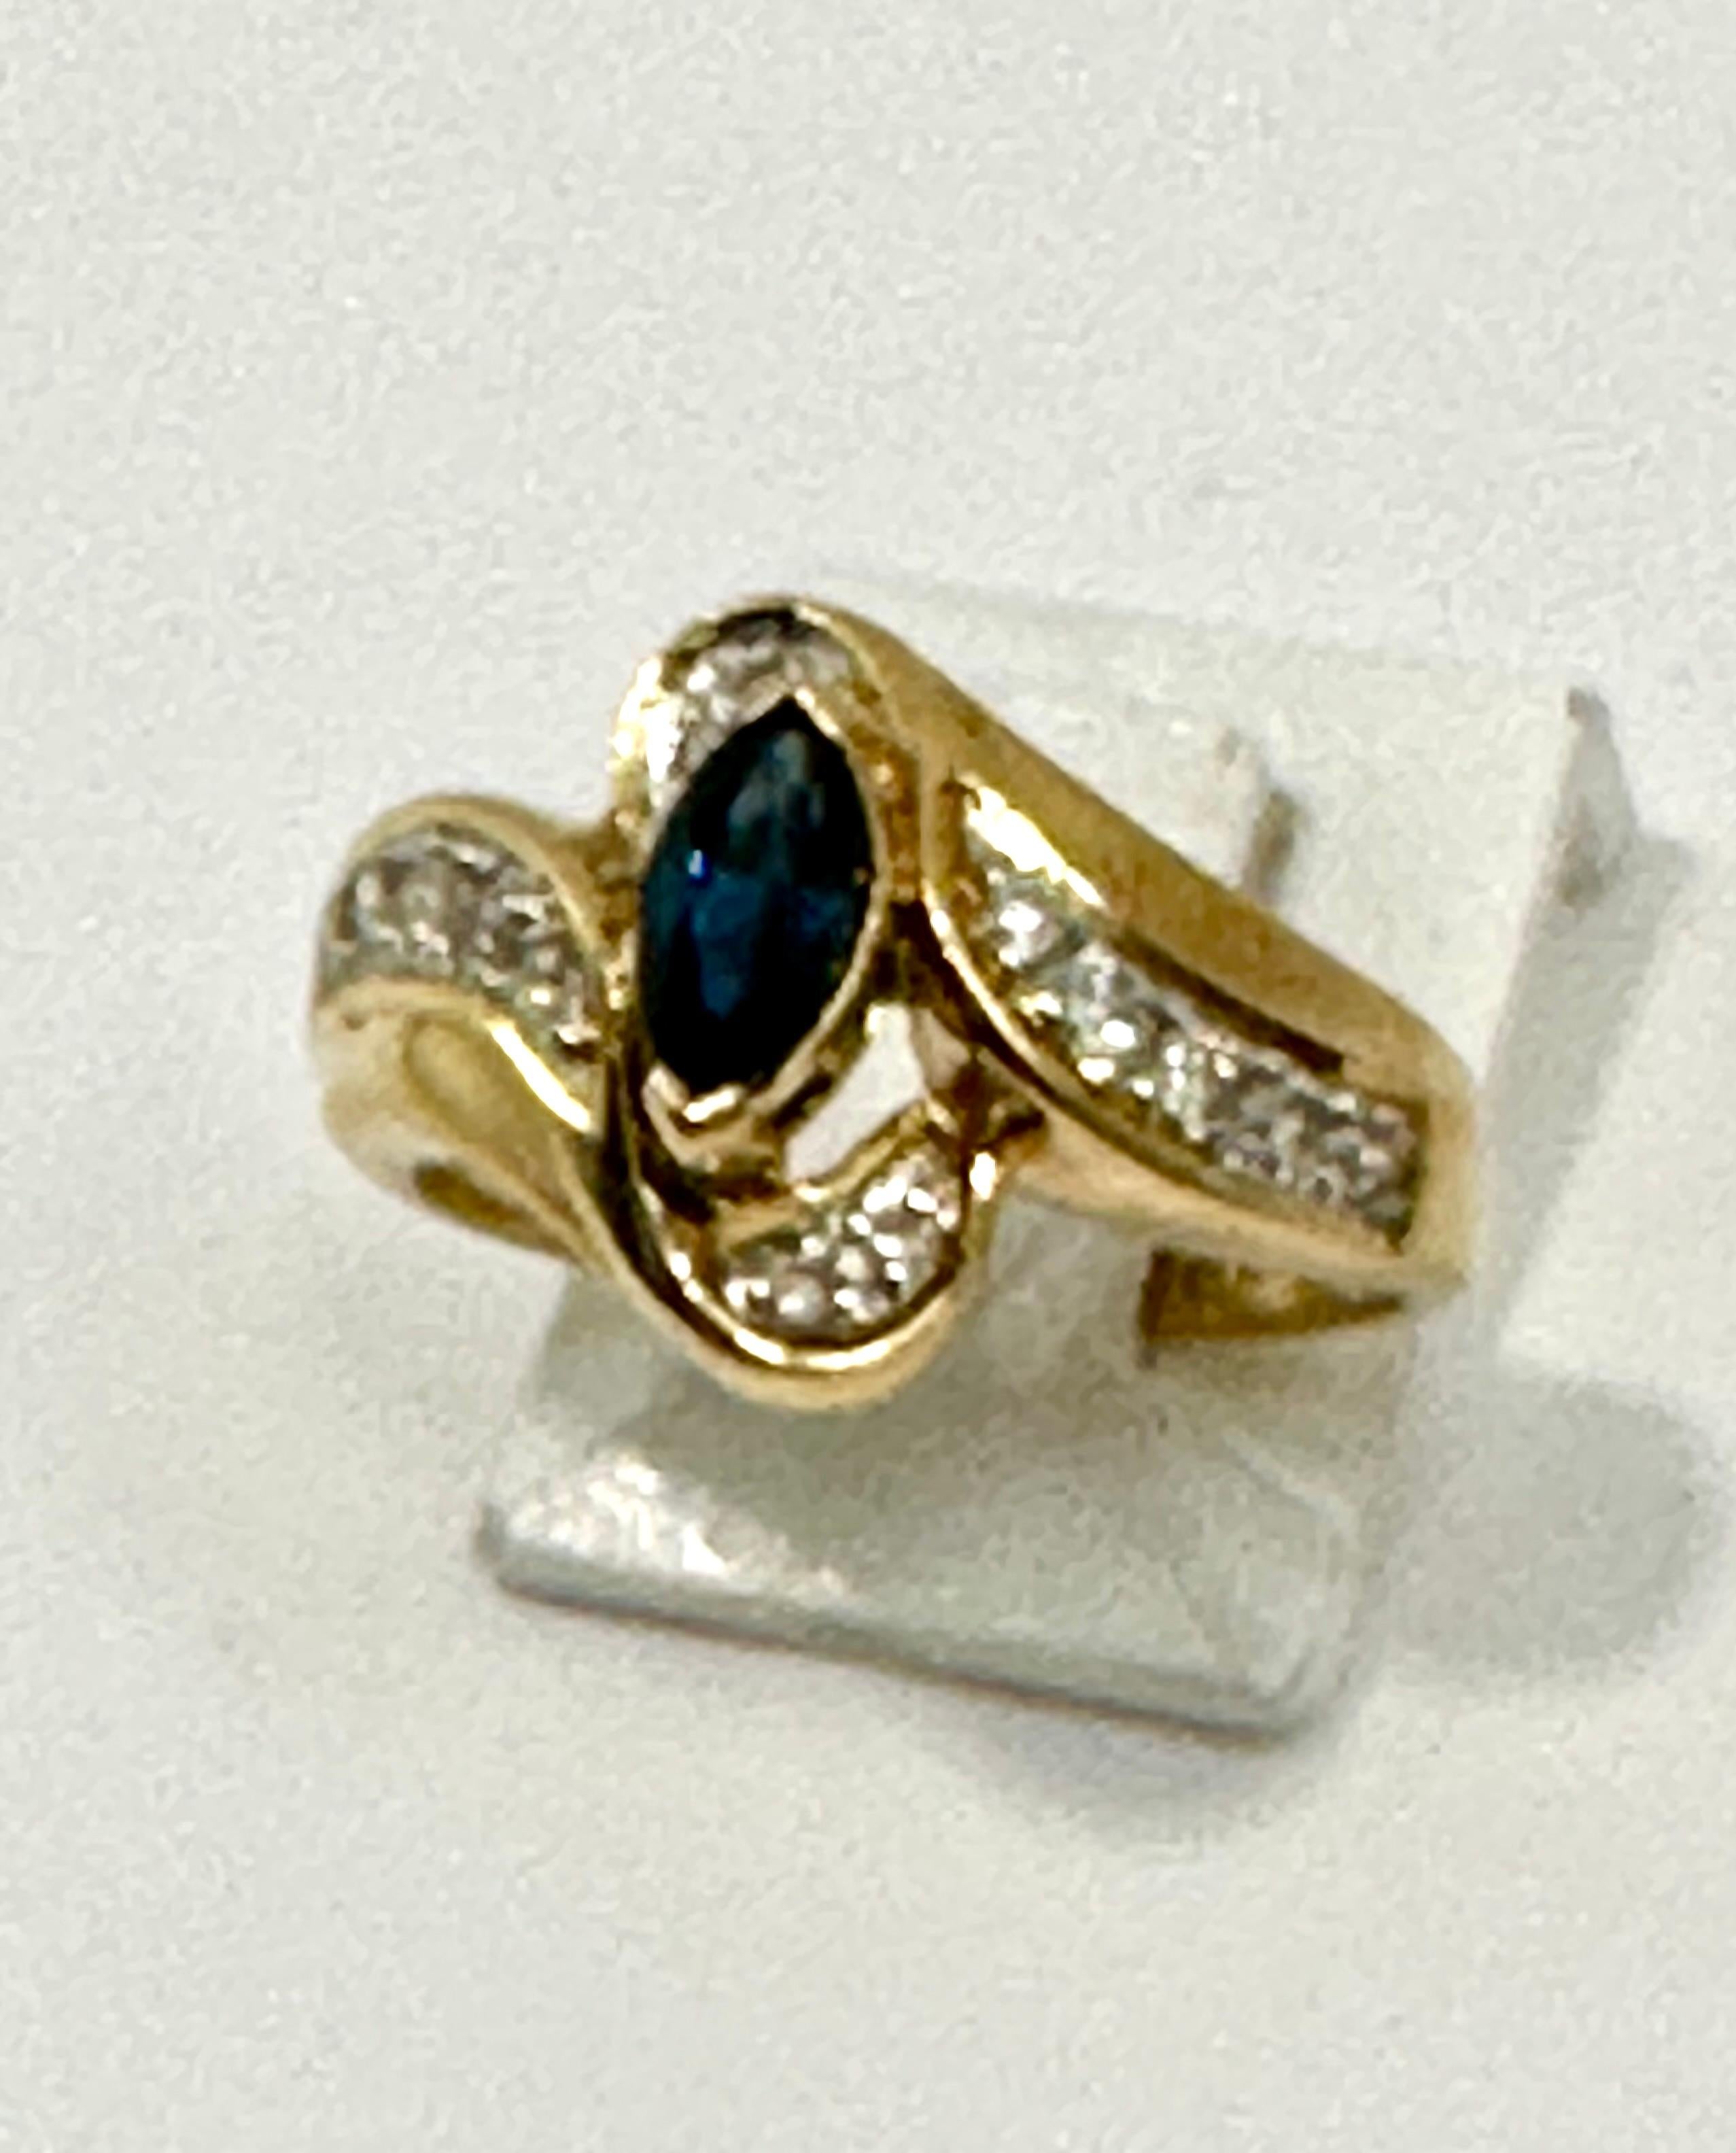 14k Yellow Gold 4mm x 6mm Marquise Sapphire and Diamond Ring ~ Size 7
with 14 diamonds

Meaning: Sapphire is a stone of wisdom and royalty, often associated with sacred things and considered the gem of gems, guiding individuals to an enlightened